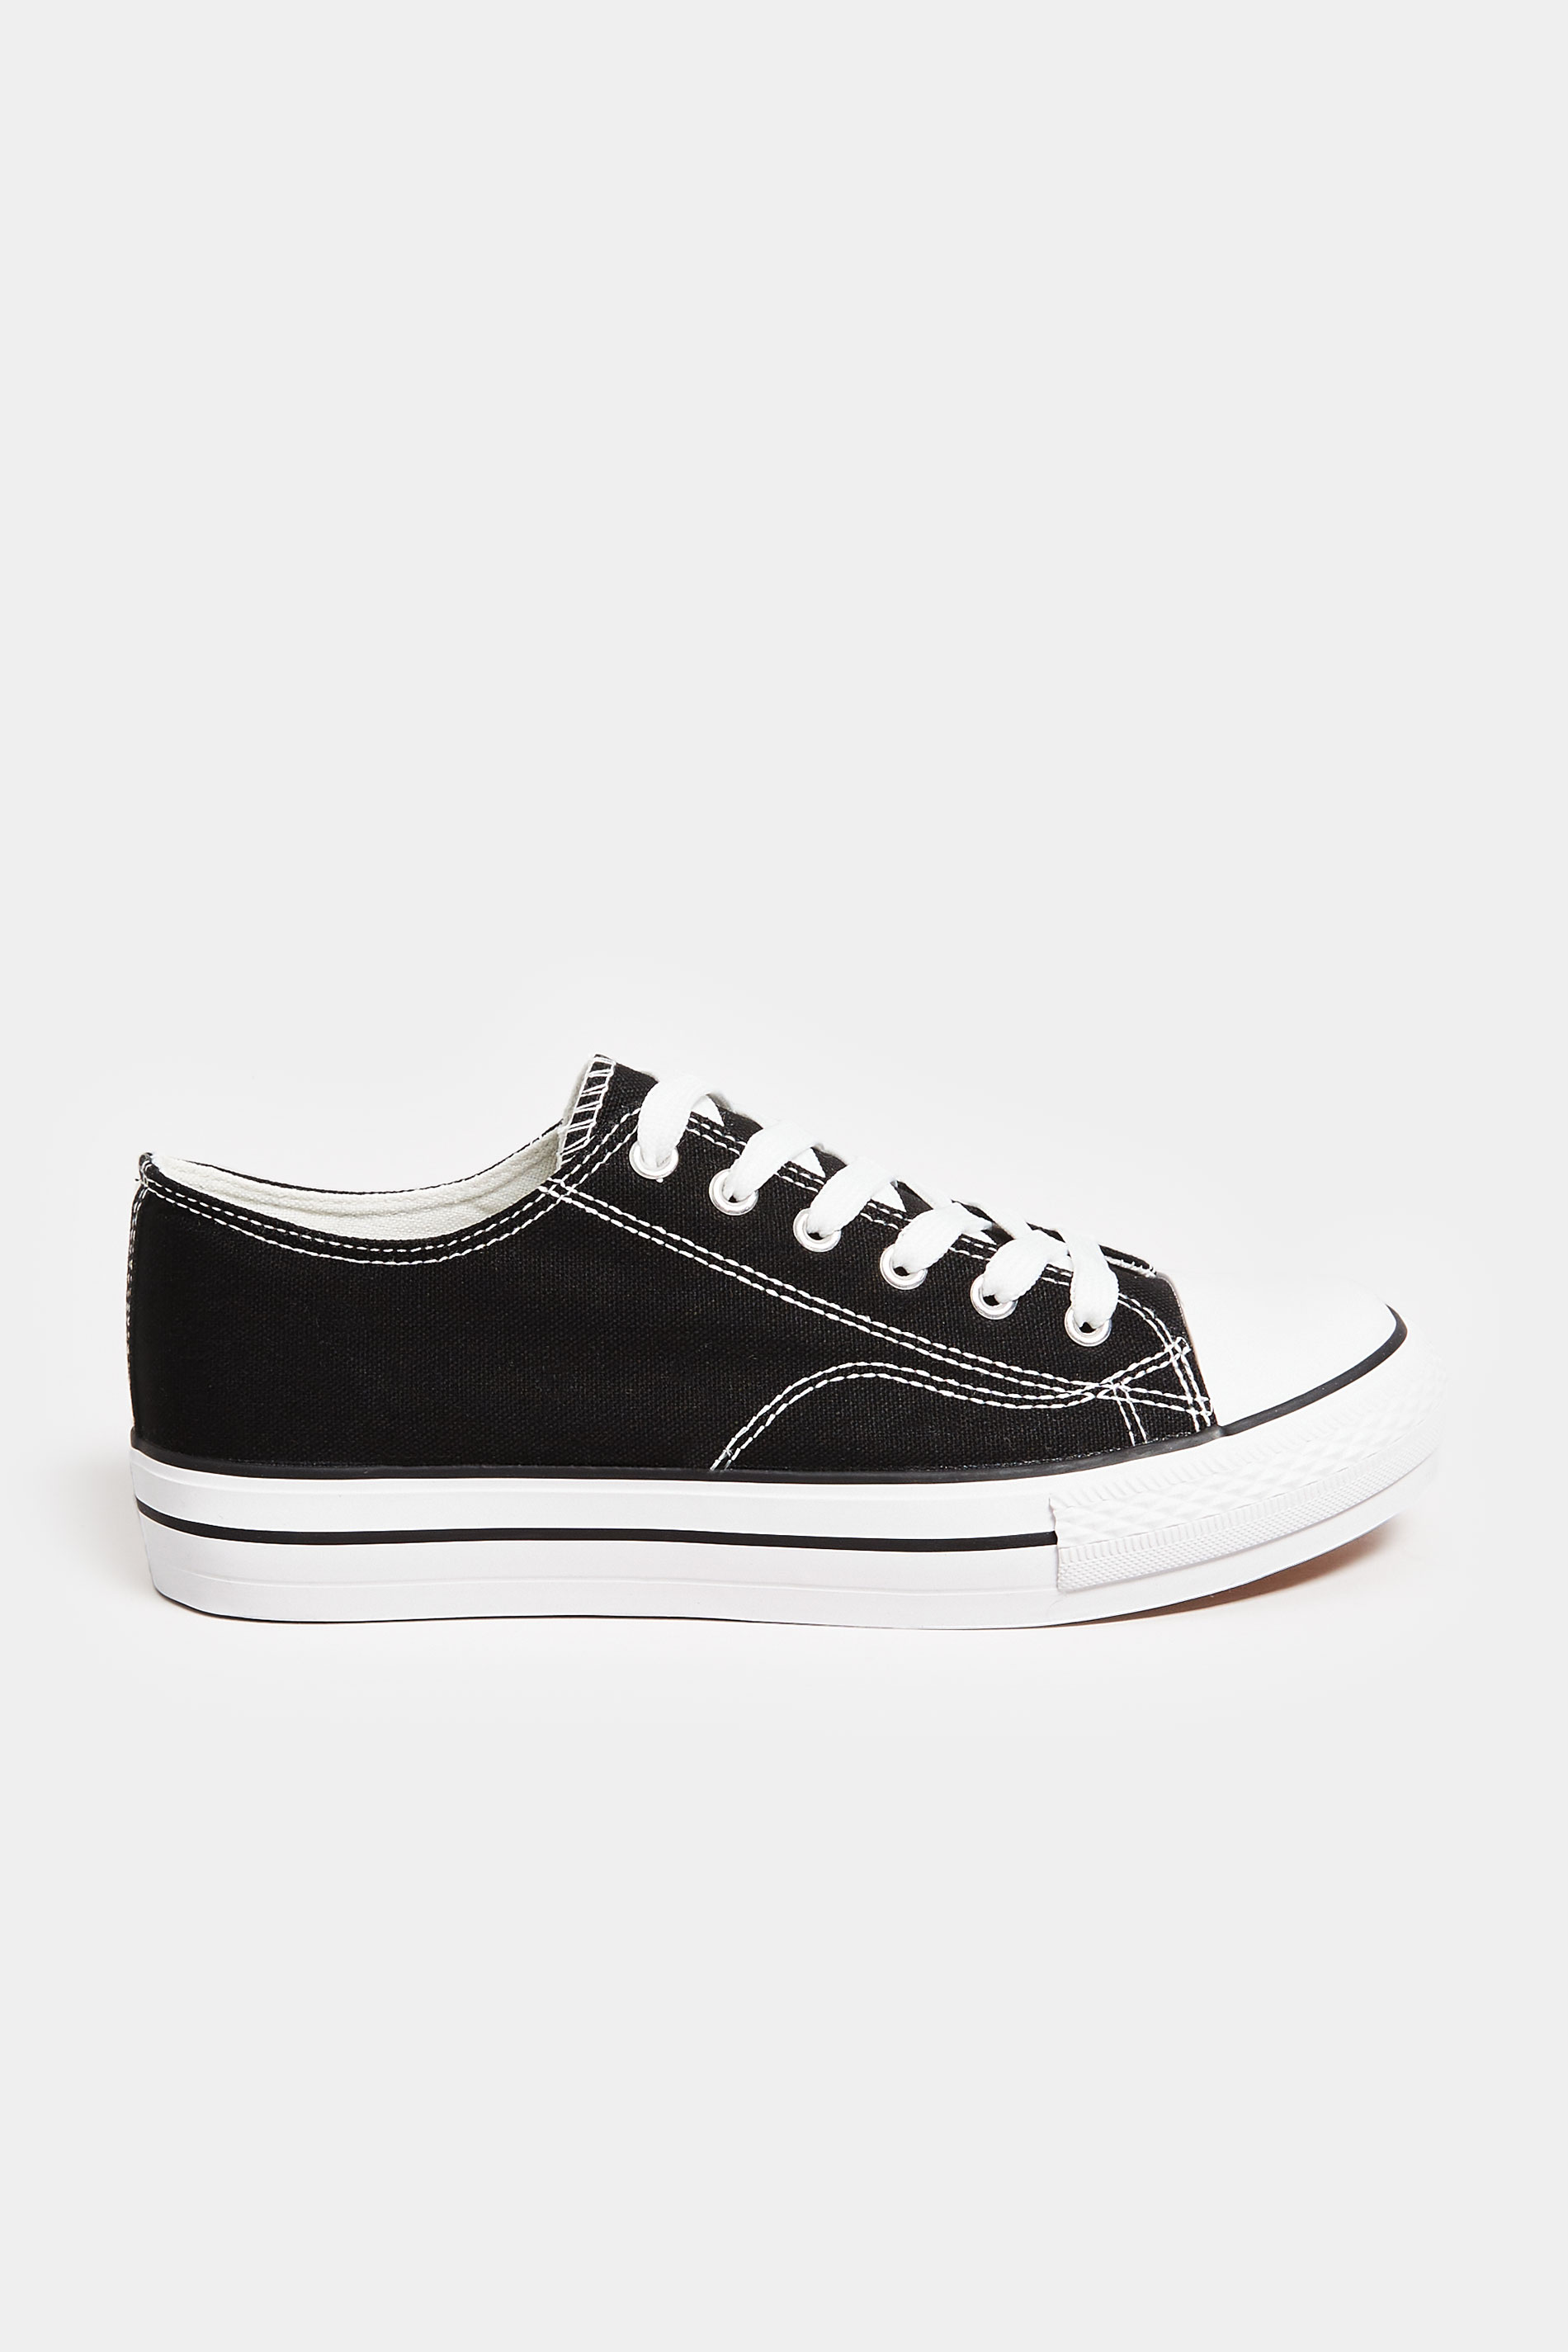 LTS Black Platform Canvas Trainers In Standard Fit | Long Tall Sally  3